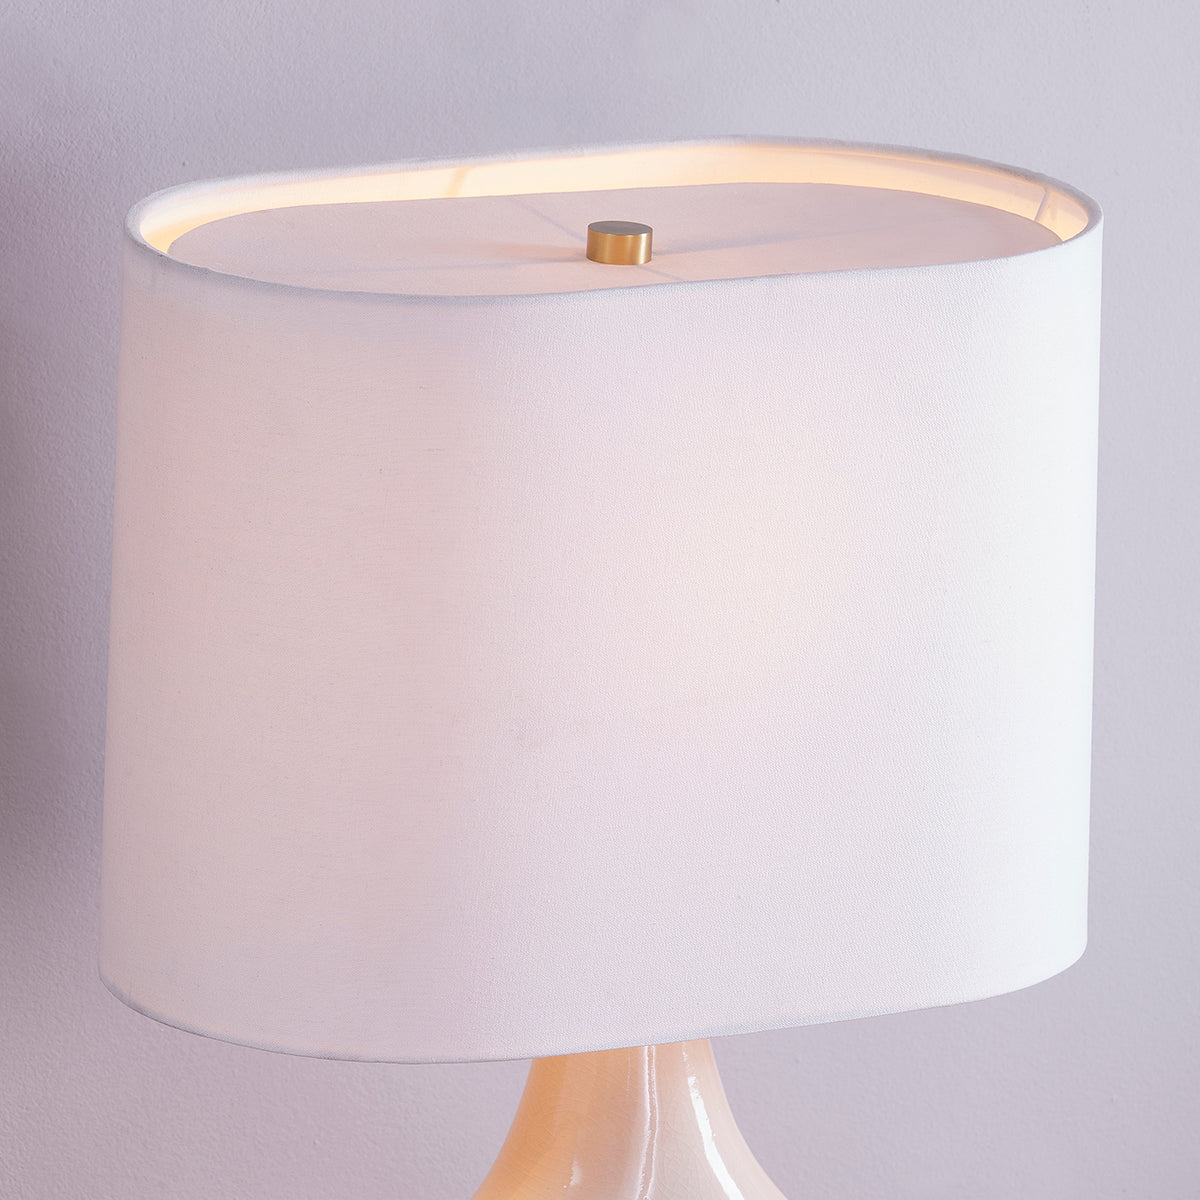 Crackled Ivory Ceramic Raffia Wrapped Base with White Belgian Linen Shade Table Lamp